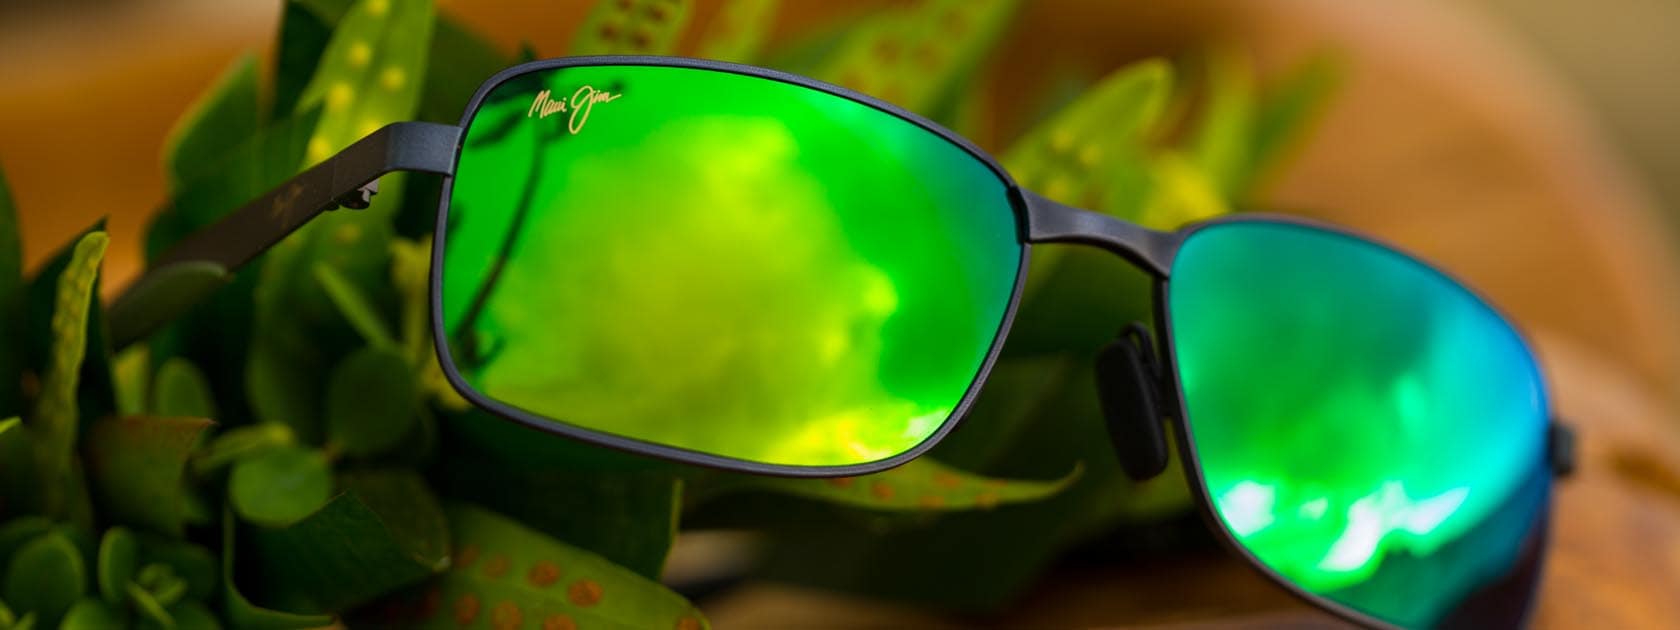 metal frame sunglasses with reflective green lenses displayed on green tropical leaves